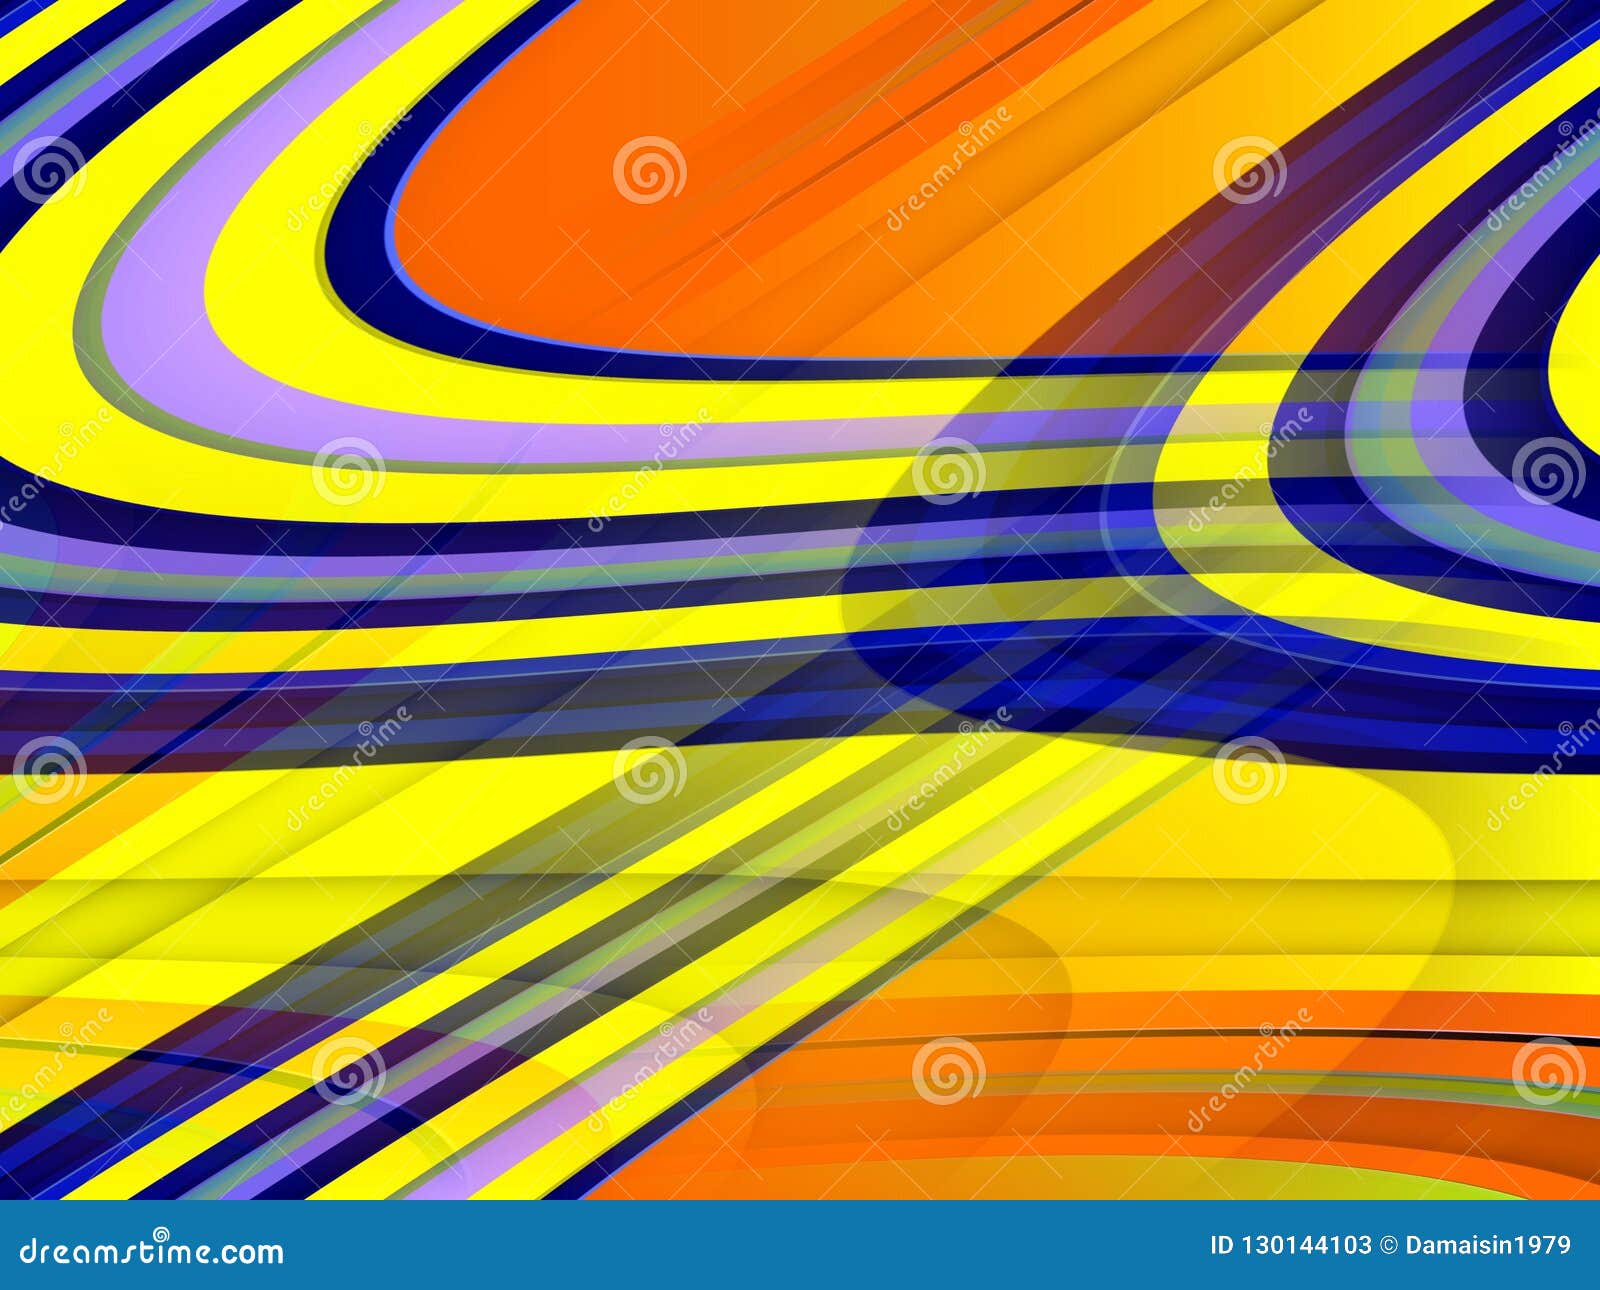 gold yellow orange blue fluid lines background, abstract colorful geometries